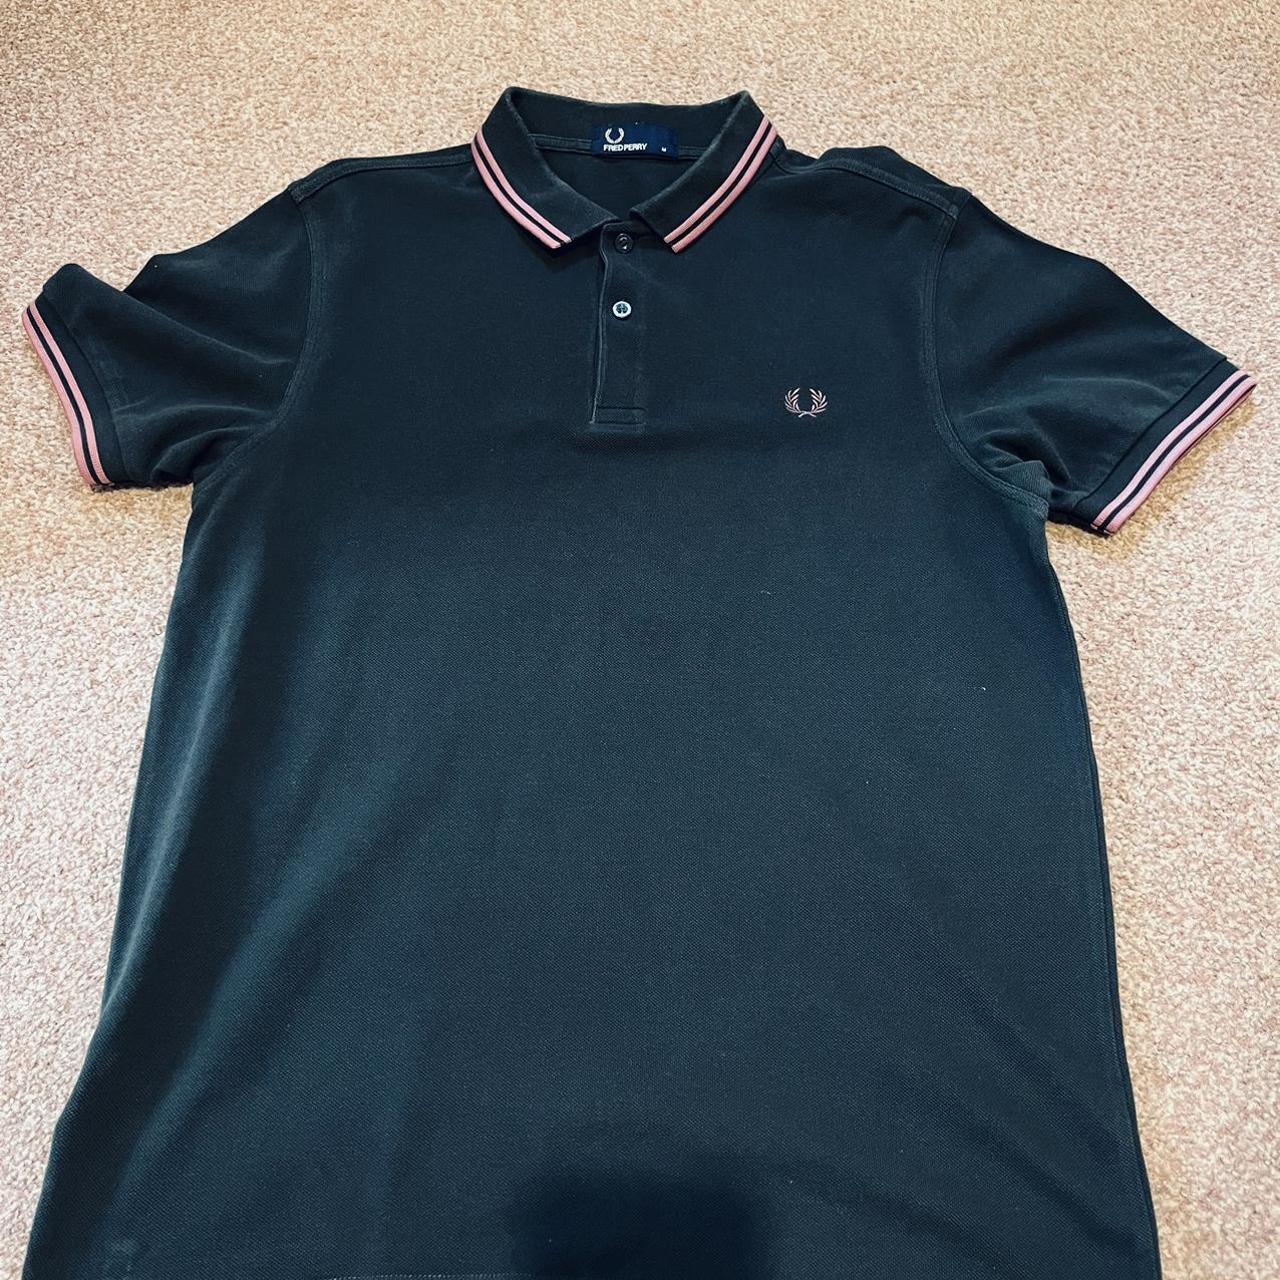 🚨Fred Perry Polo Shirt🚨 Size- Medium Condition-... - Depop